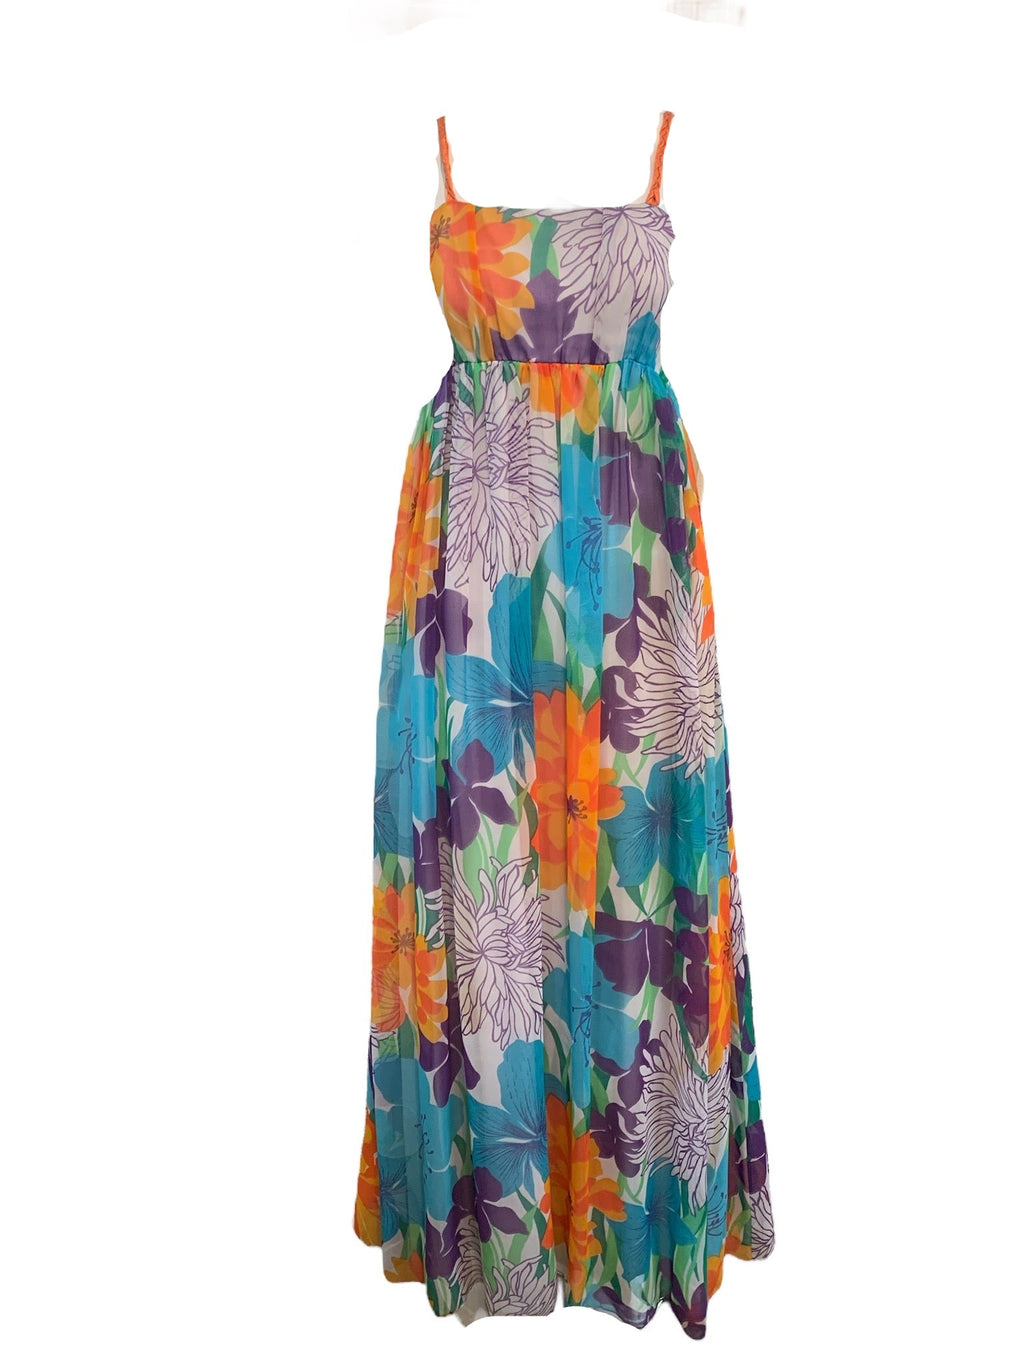 70s Multi Colored Floral Maxi Dress  FRONT 1 of 5